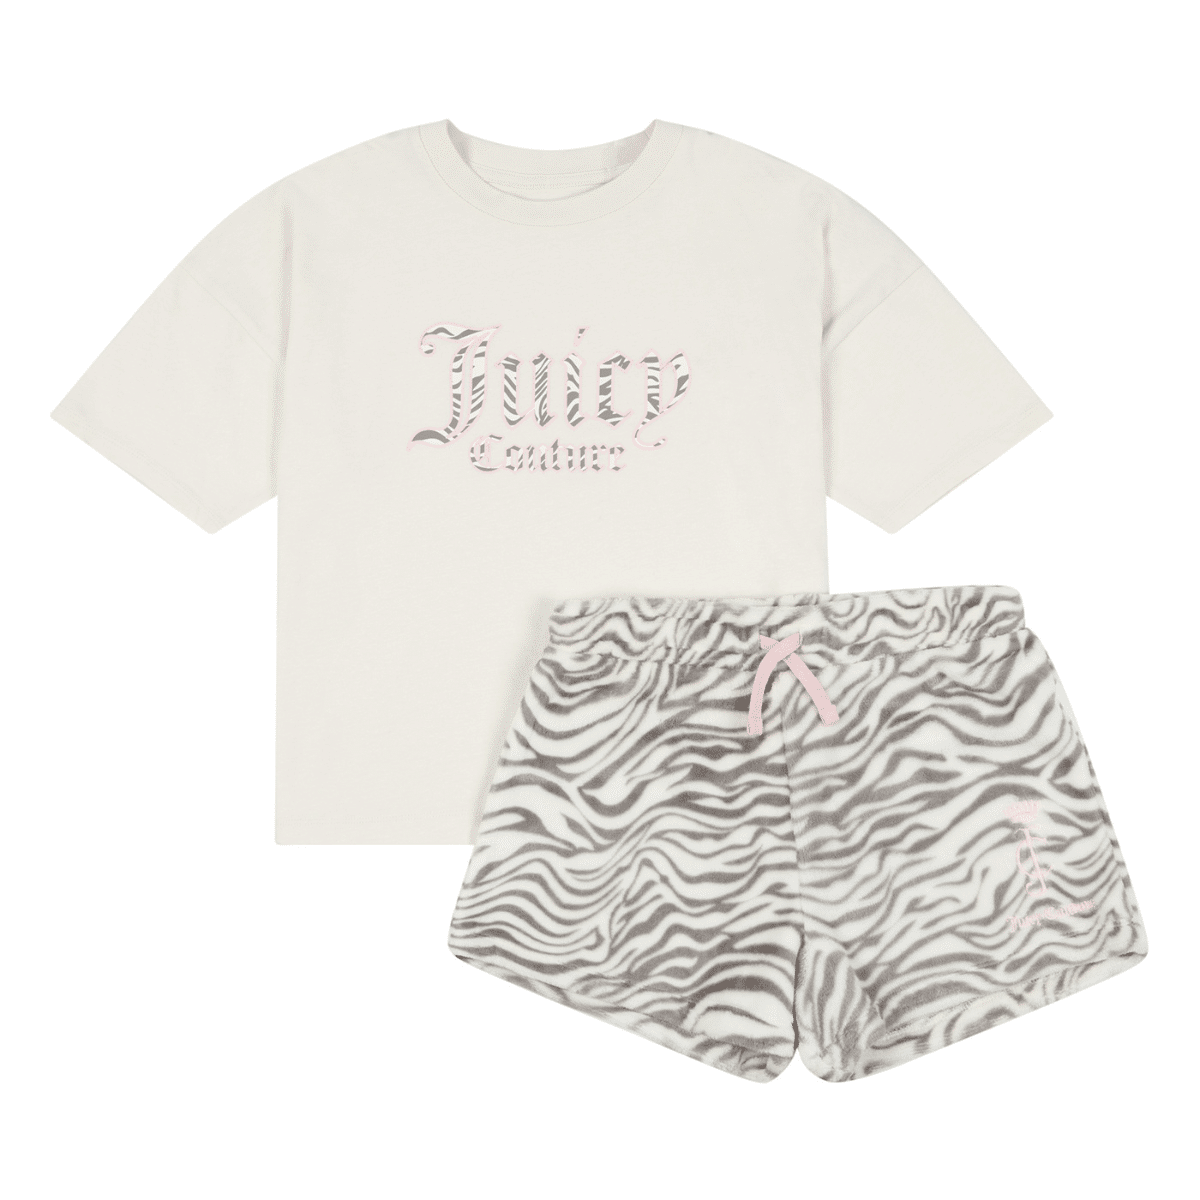 Juicy Couture Girls Tiger Tee and Short Set - Kids Life Clothing -  Children's designer clothing